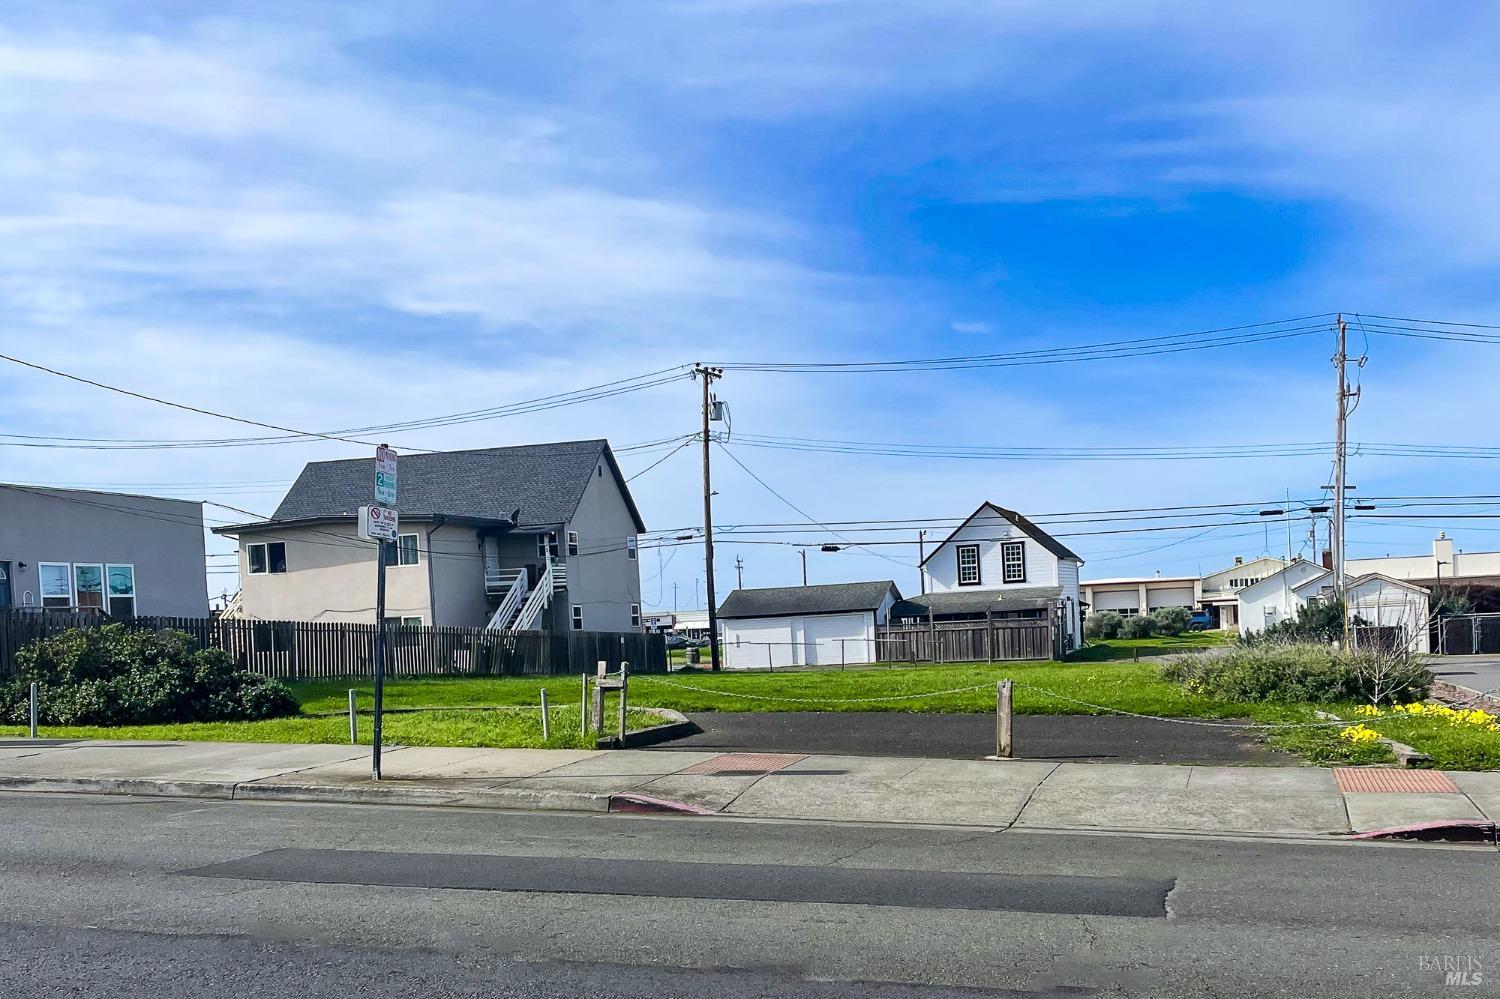 Photo of 127 Franklin St in Fort Bragg, CA